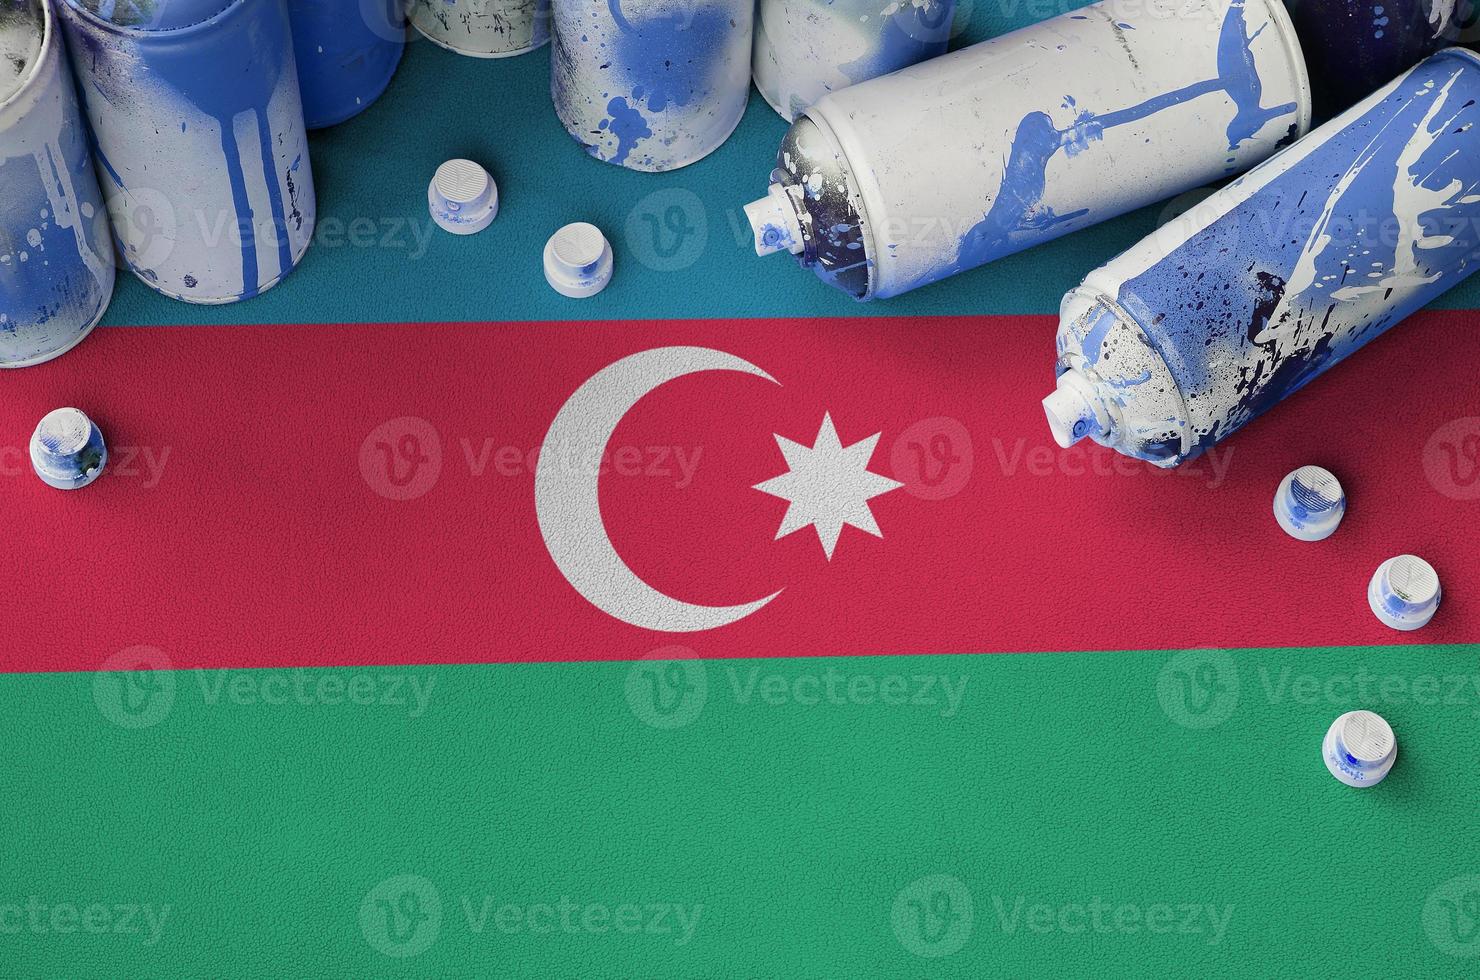 Azerbaijan flag and few used aerosol spray cans for graffiti painting. Street art culture concept photo